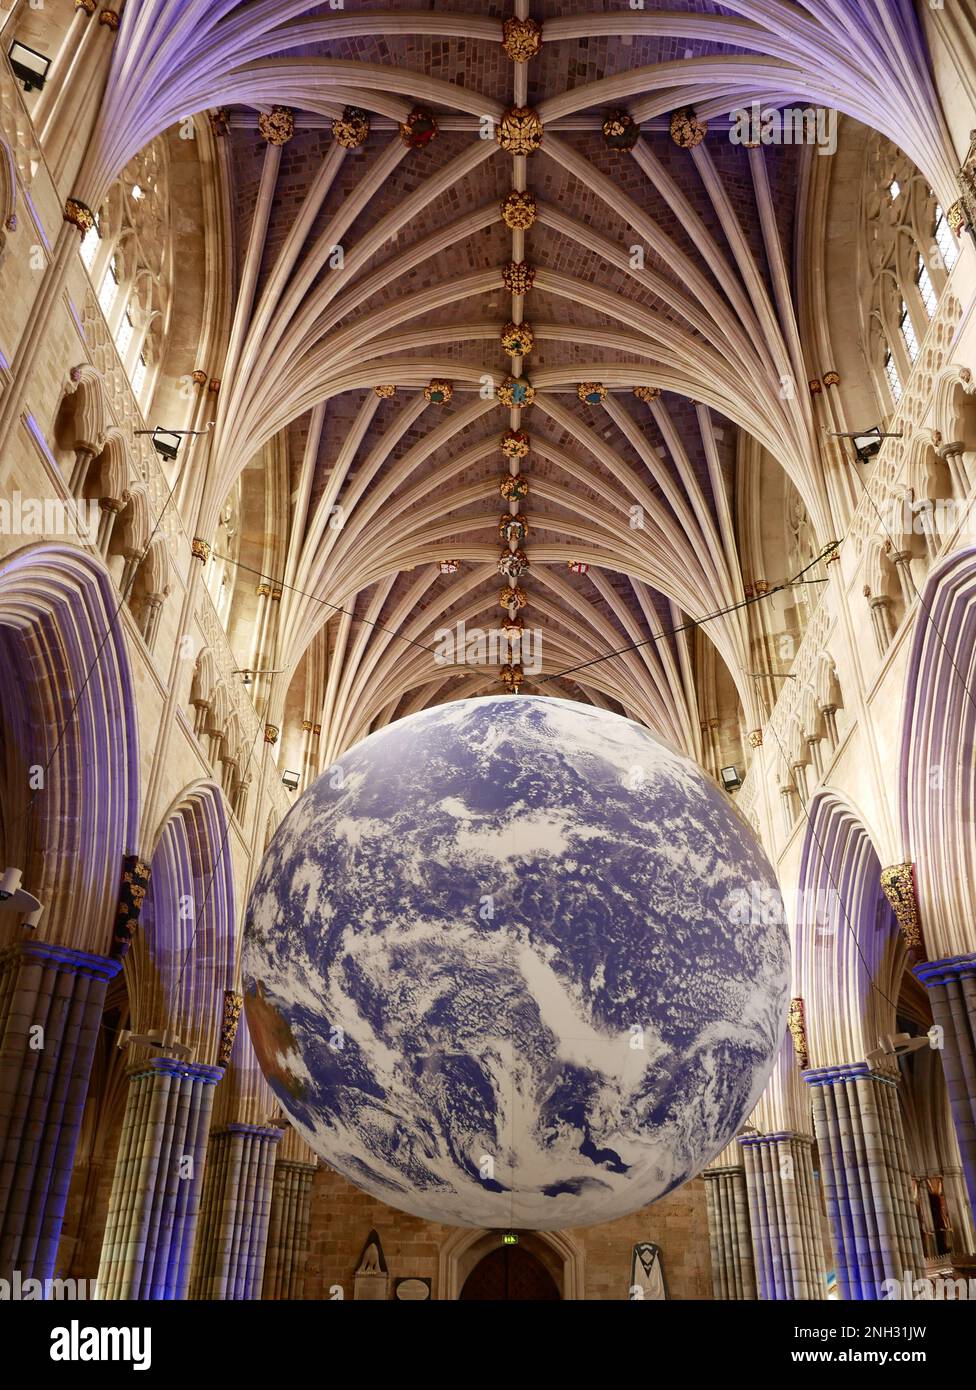 Gaia, a touring artwork by artist Luke Jerram, presented in Exeter Cathedral, Exeter, Devon UK Stock Photo